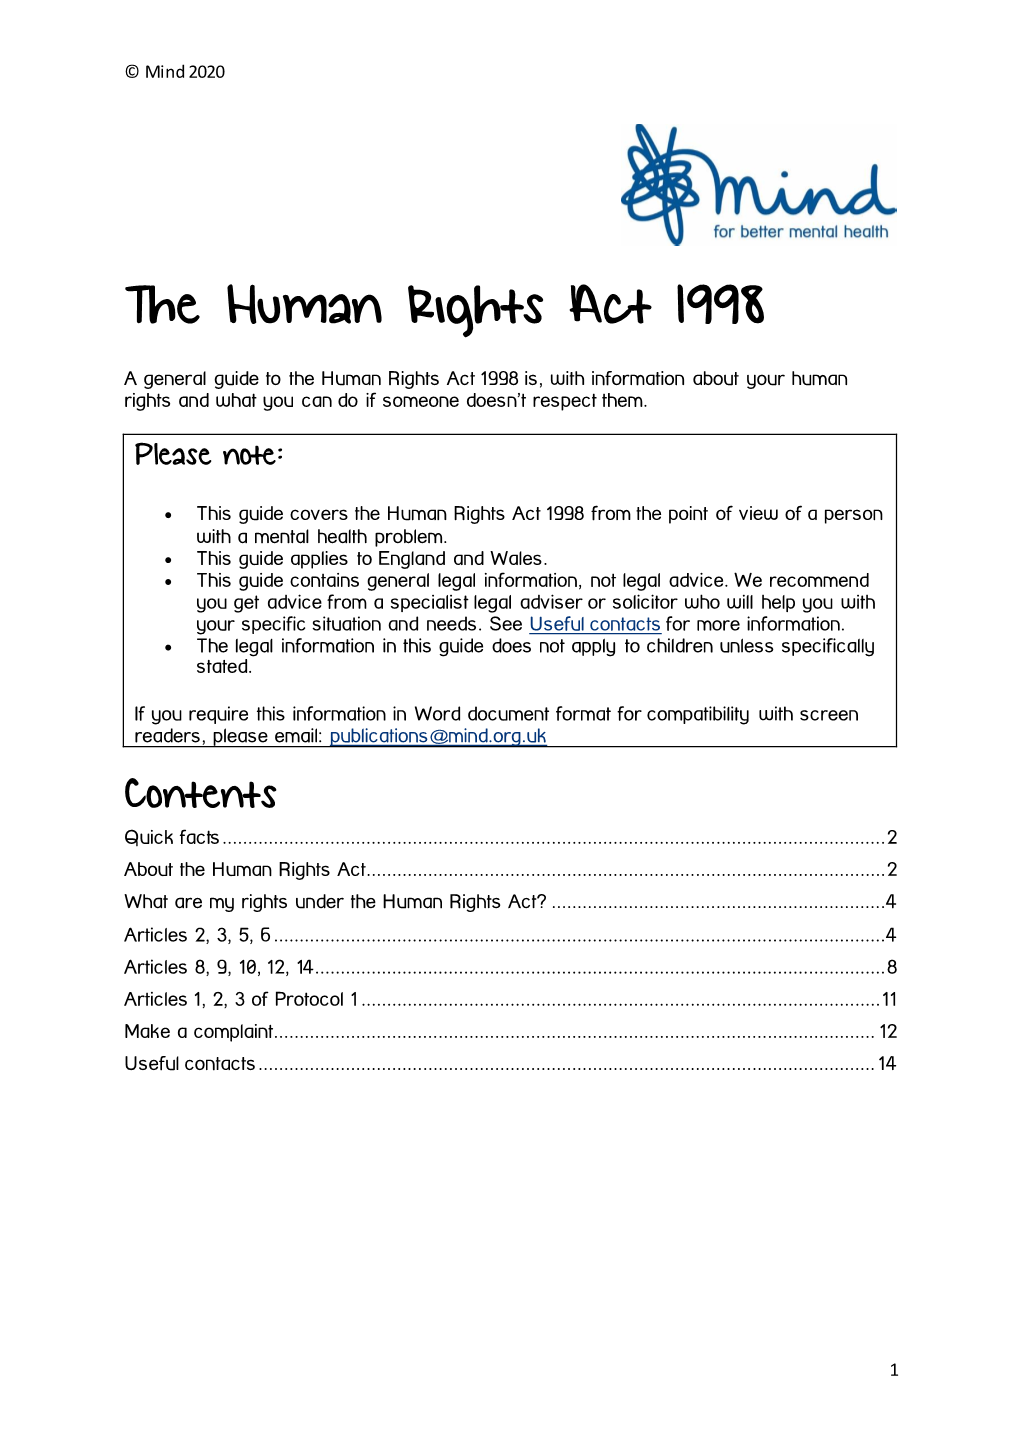 The Human Rights Act 1998